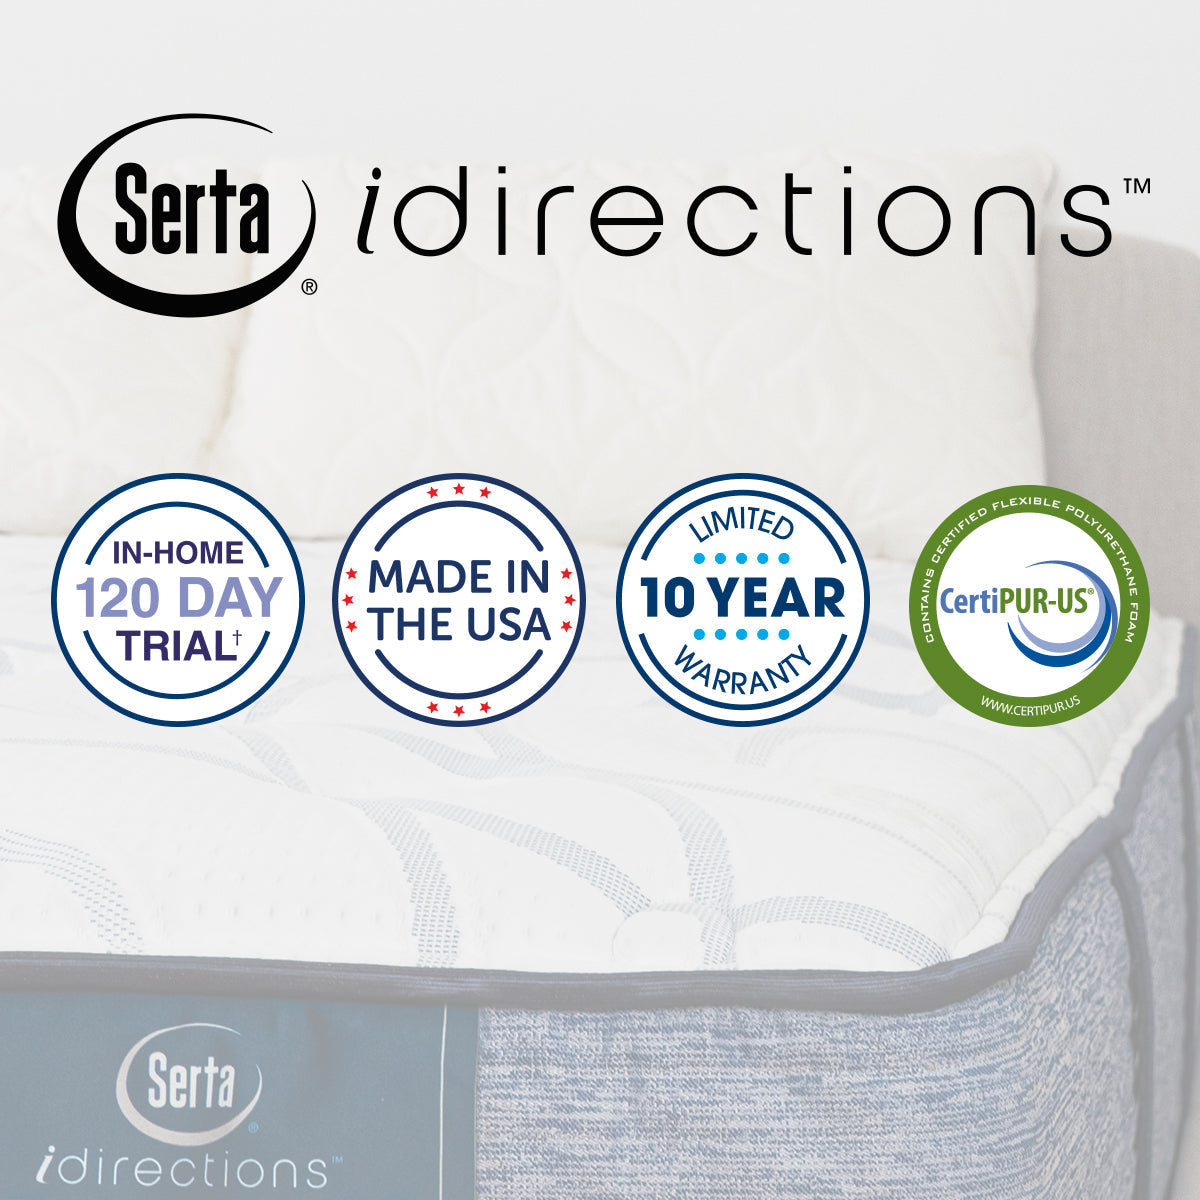 Serta iDirections X7 Hybrid II Plush Mattress Product Features; In-Home 120 Day Trial, Made in the USA, Limited 10 Year Warranty, CertiPUR-US Certified